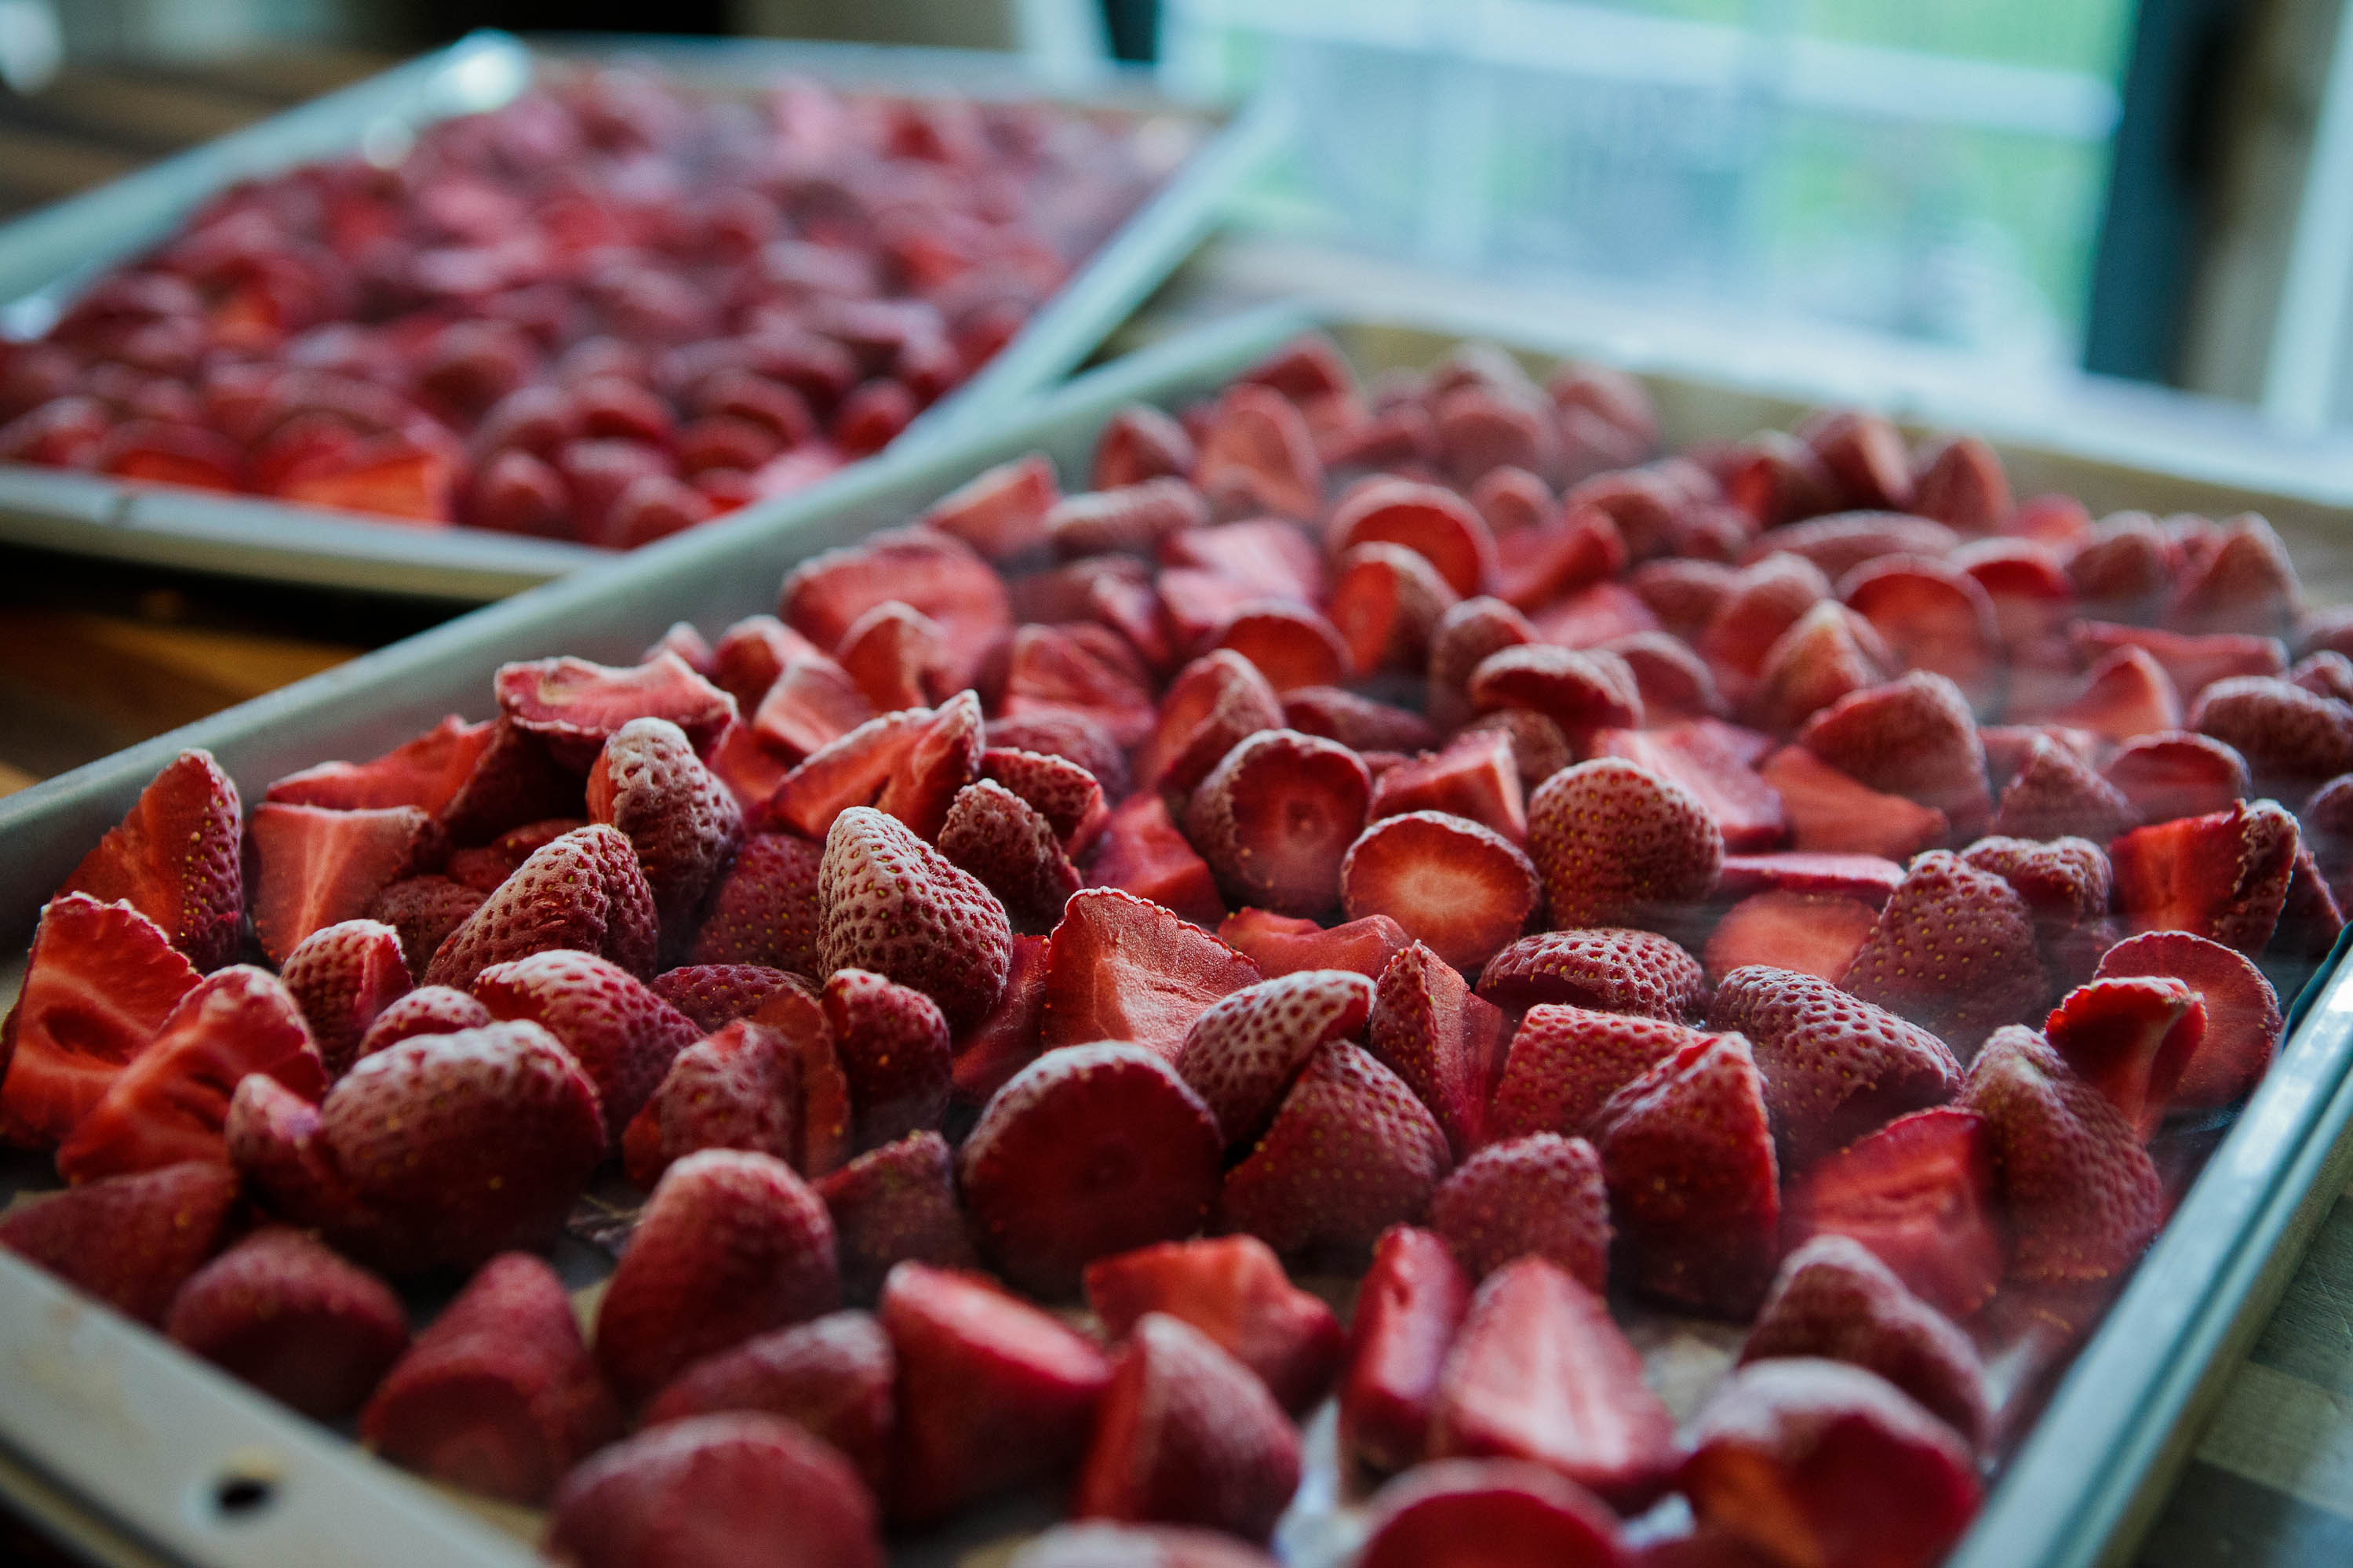 Frozen strawberries on a tray